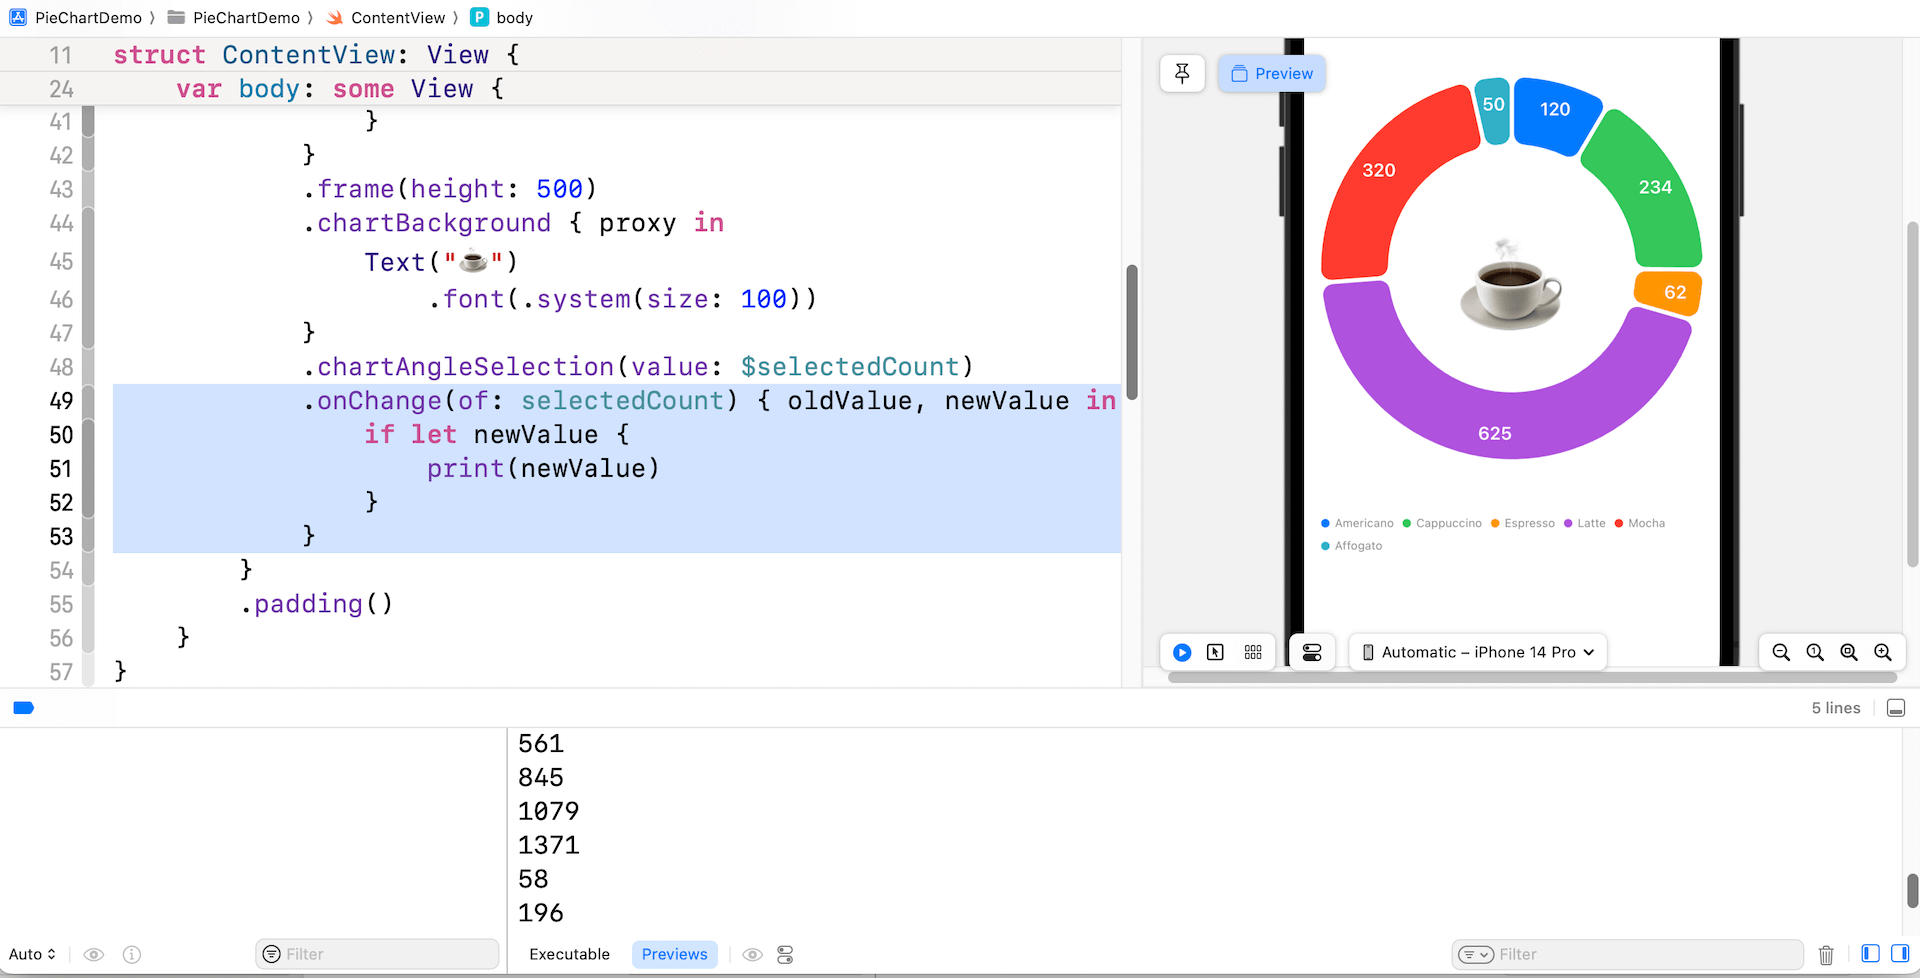 swiftui-chartangleselection-pie-chart